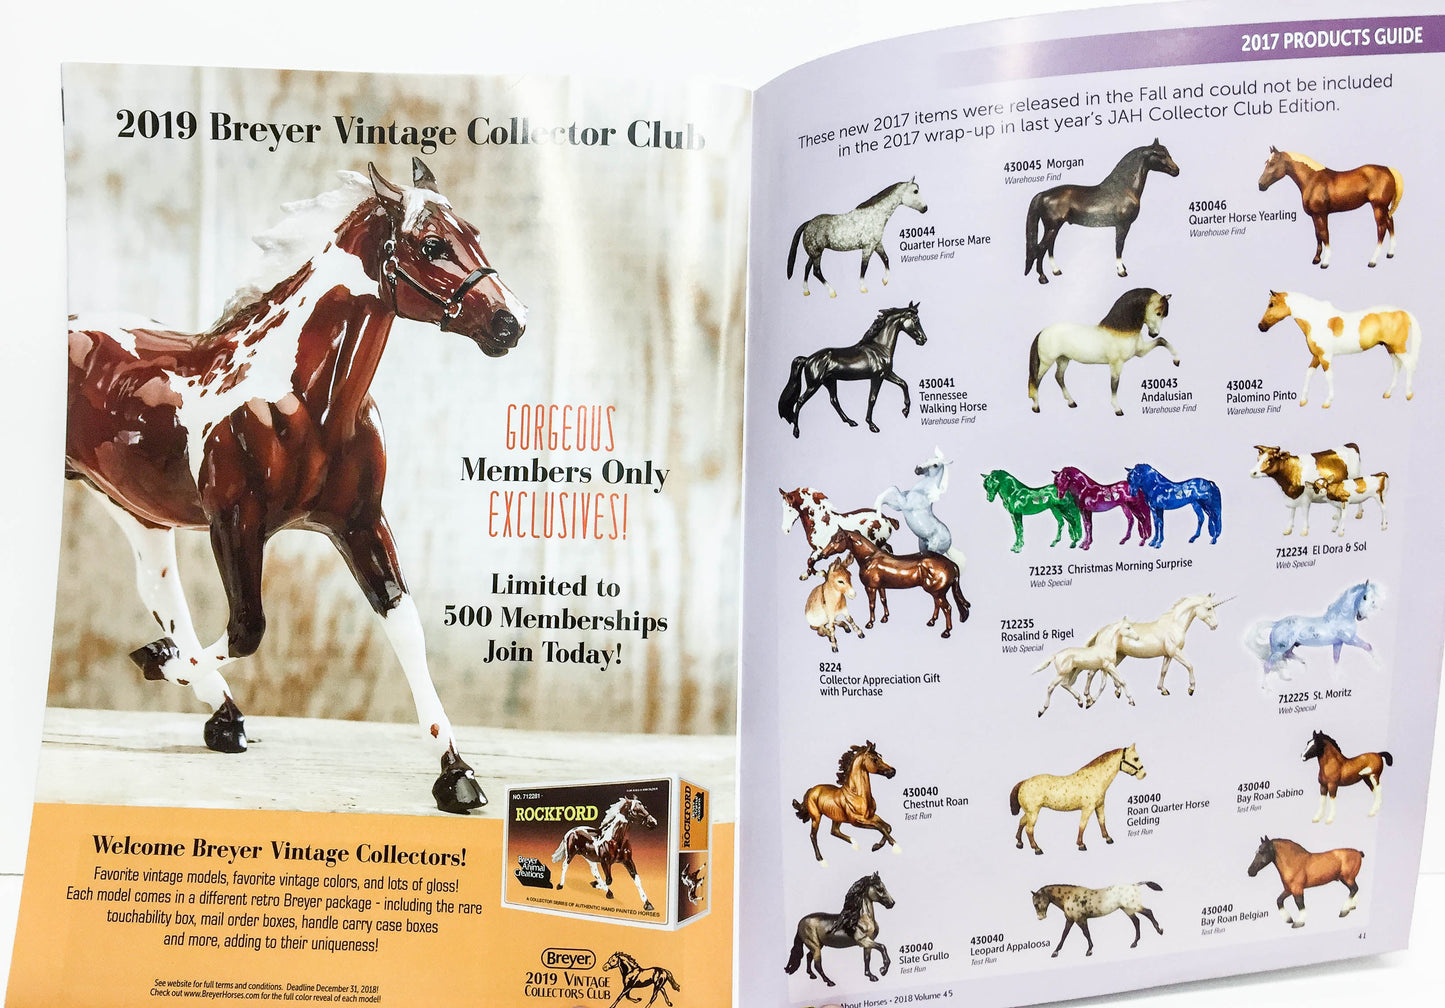 Just About Horses Magazine Vol. 45, 2018